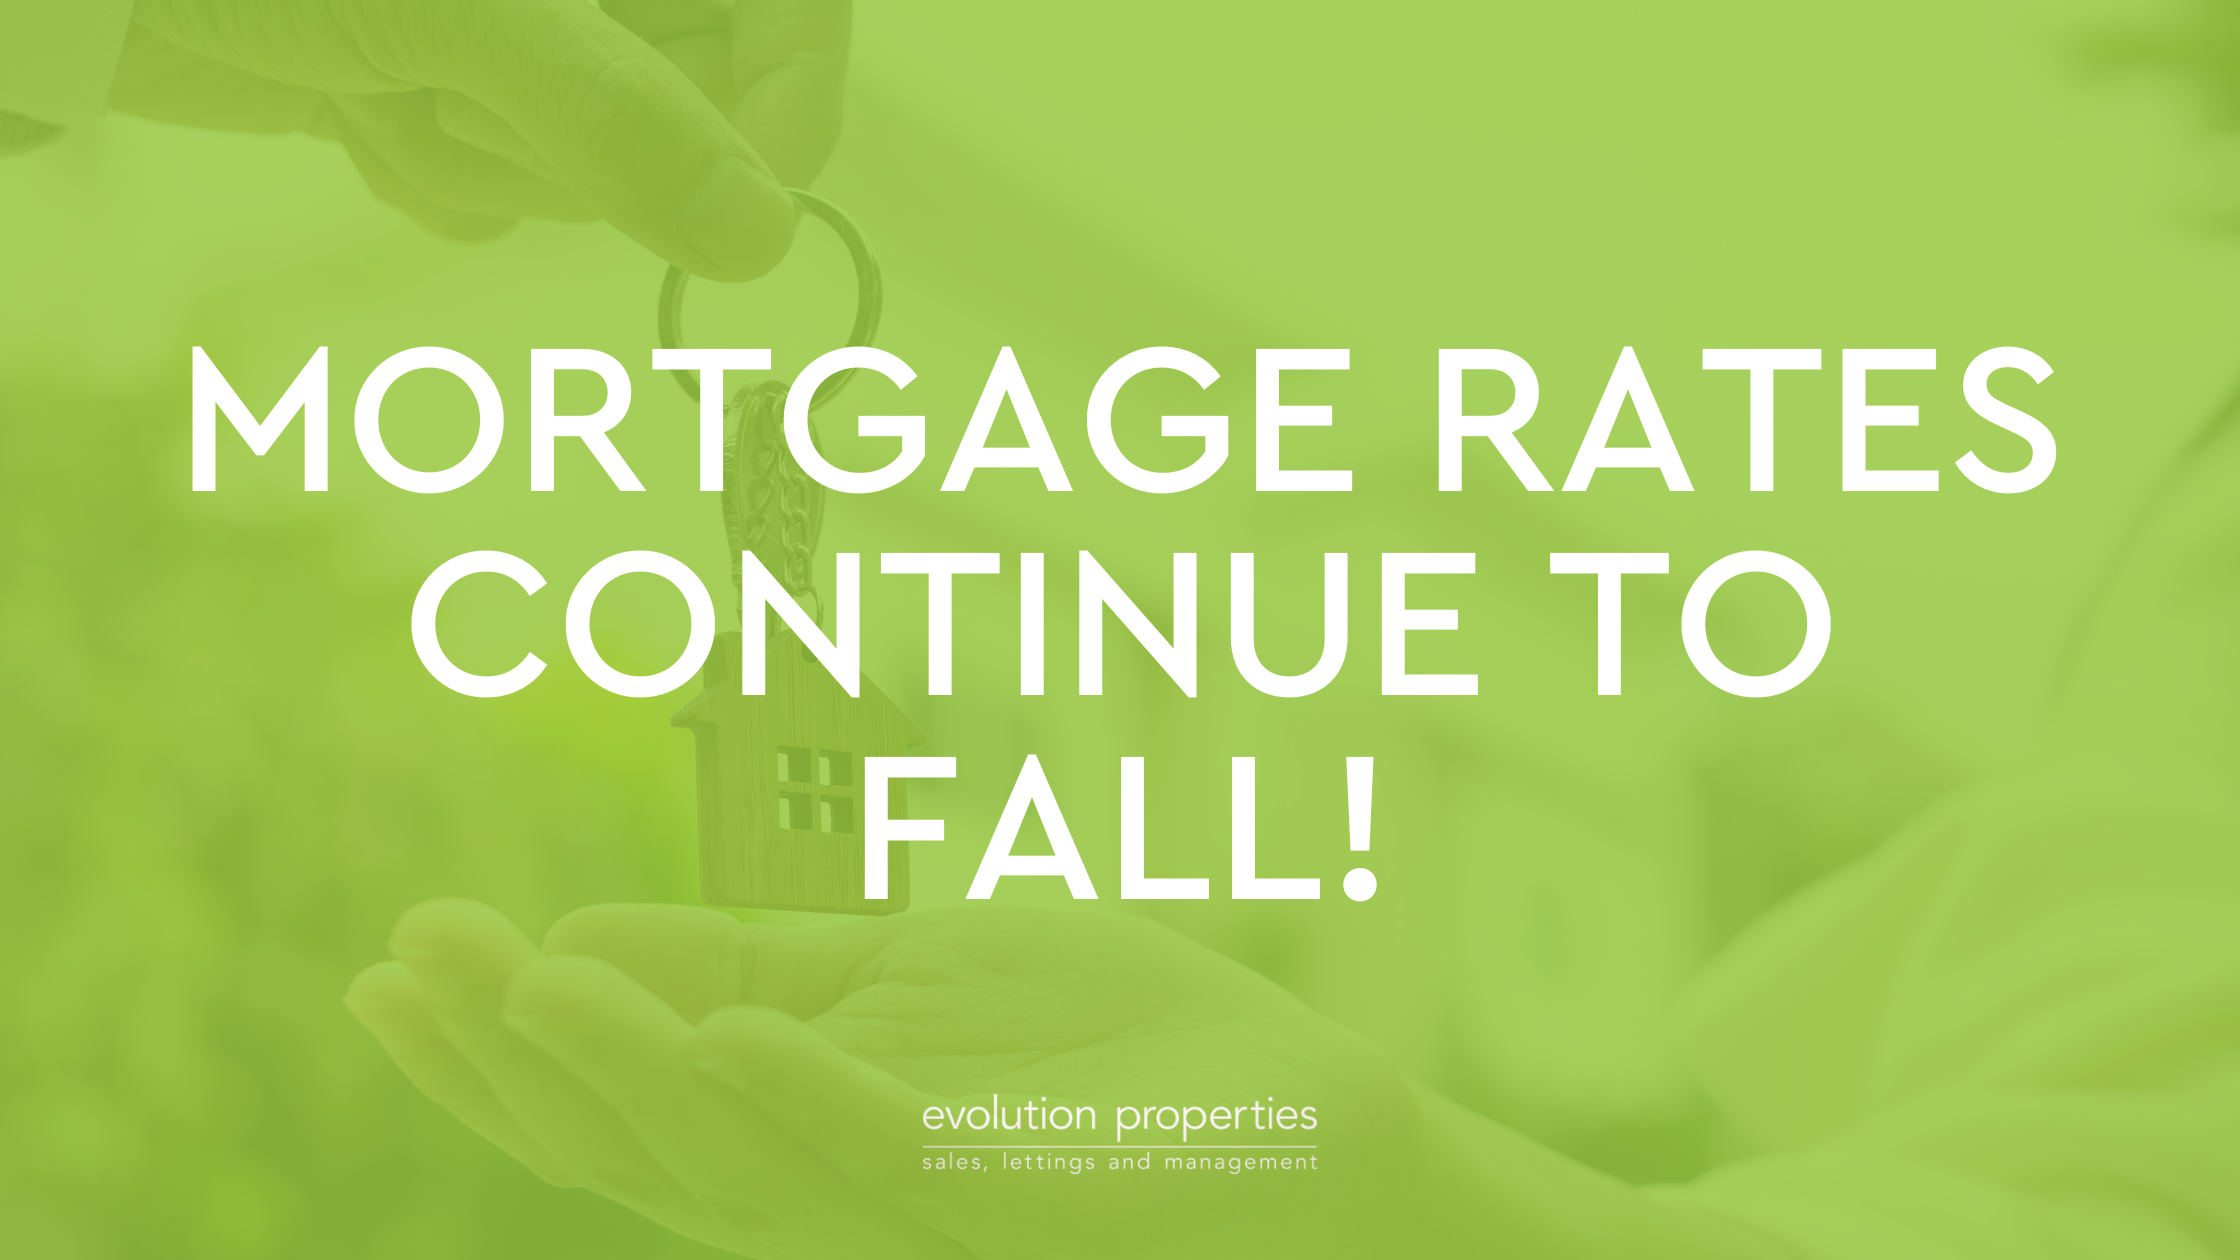 Mortgage rates continue to fall!